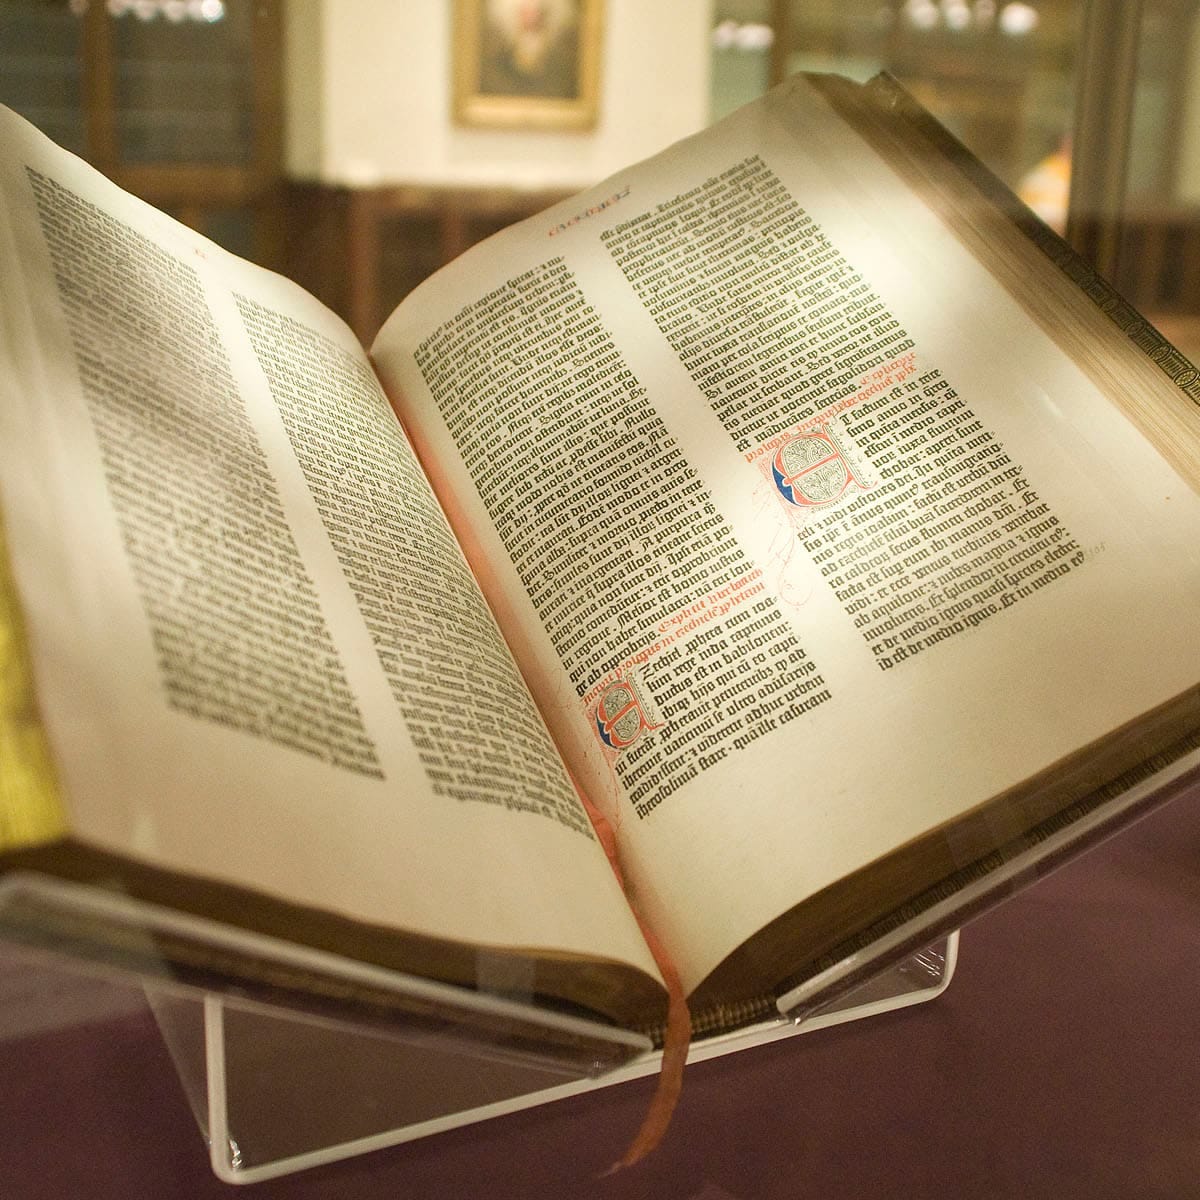 7 Things You May Not Know About the Gutenberg Bible - HISTORY